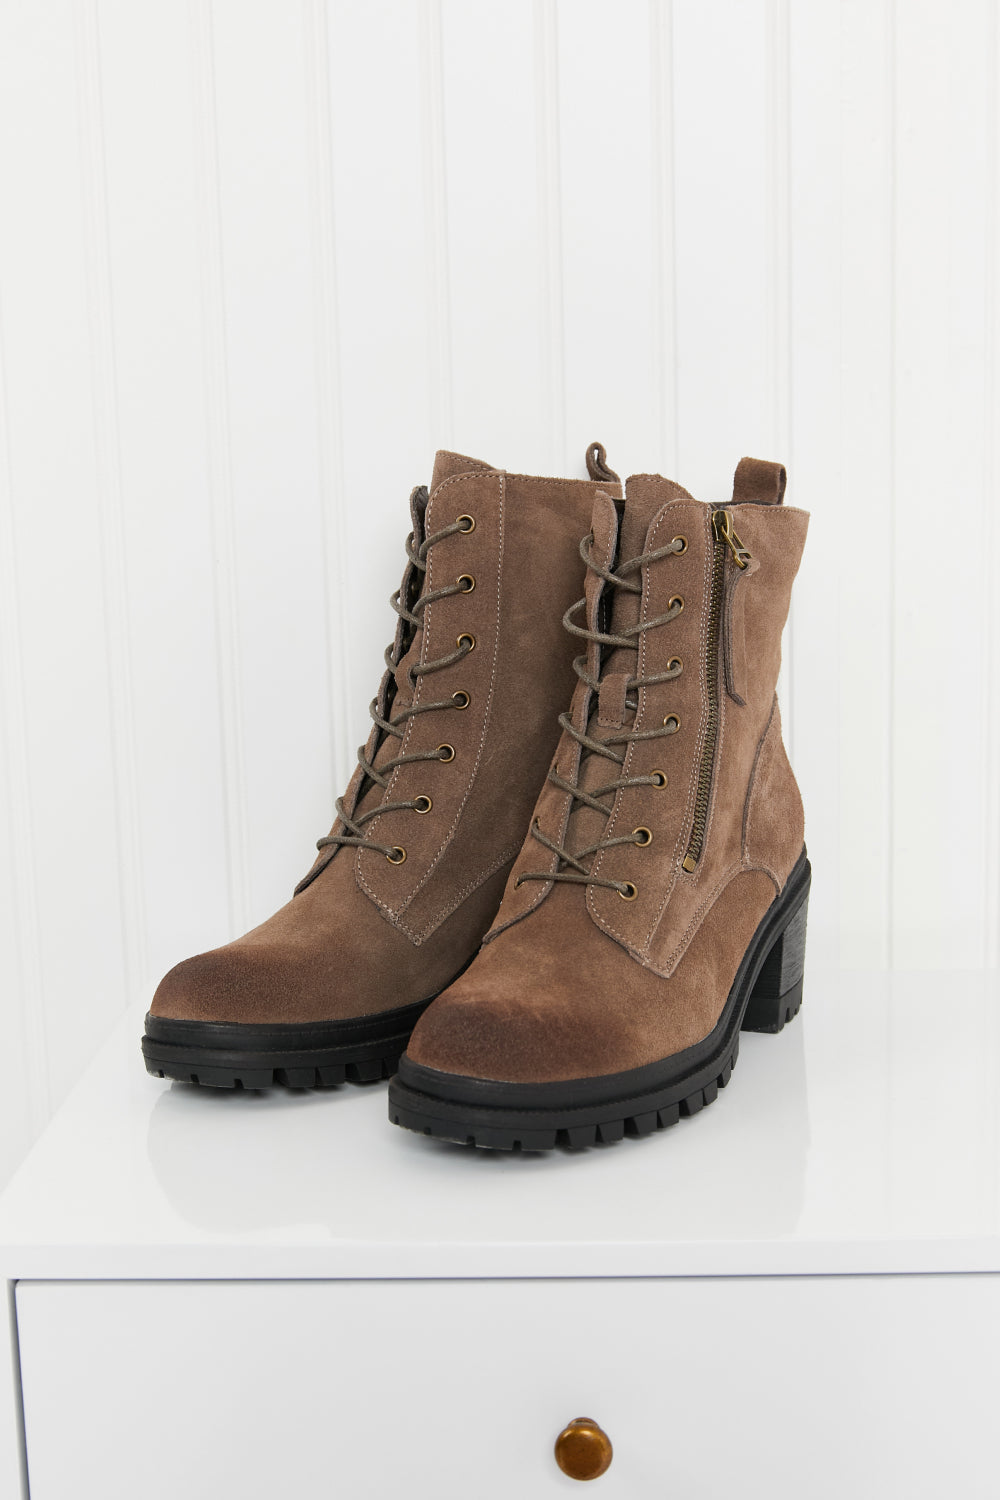 Legend Searching for Love Burnished Zip-Up Combat Booties